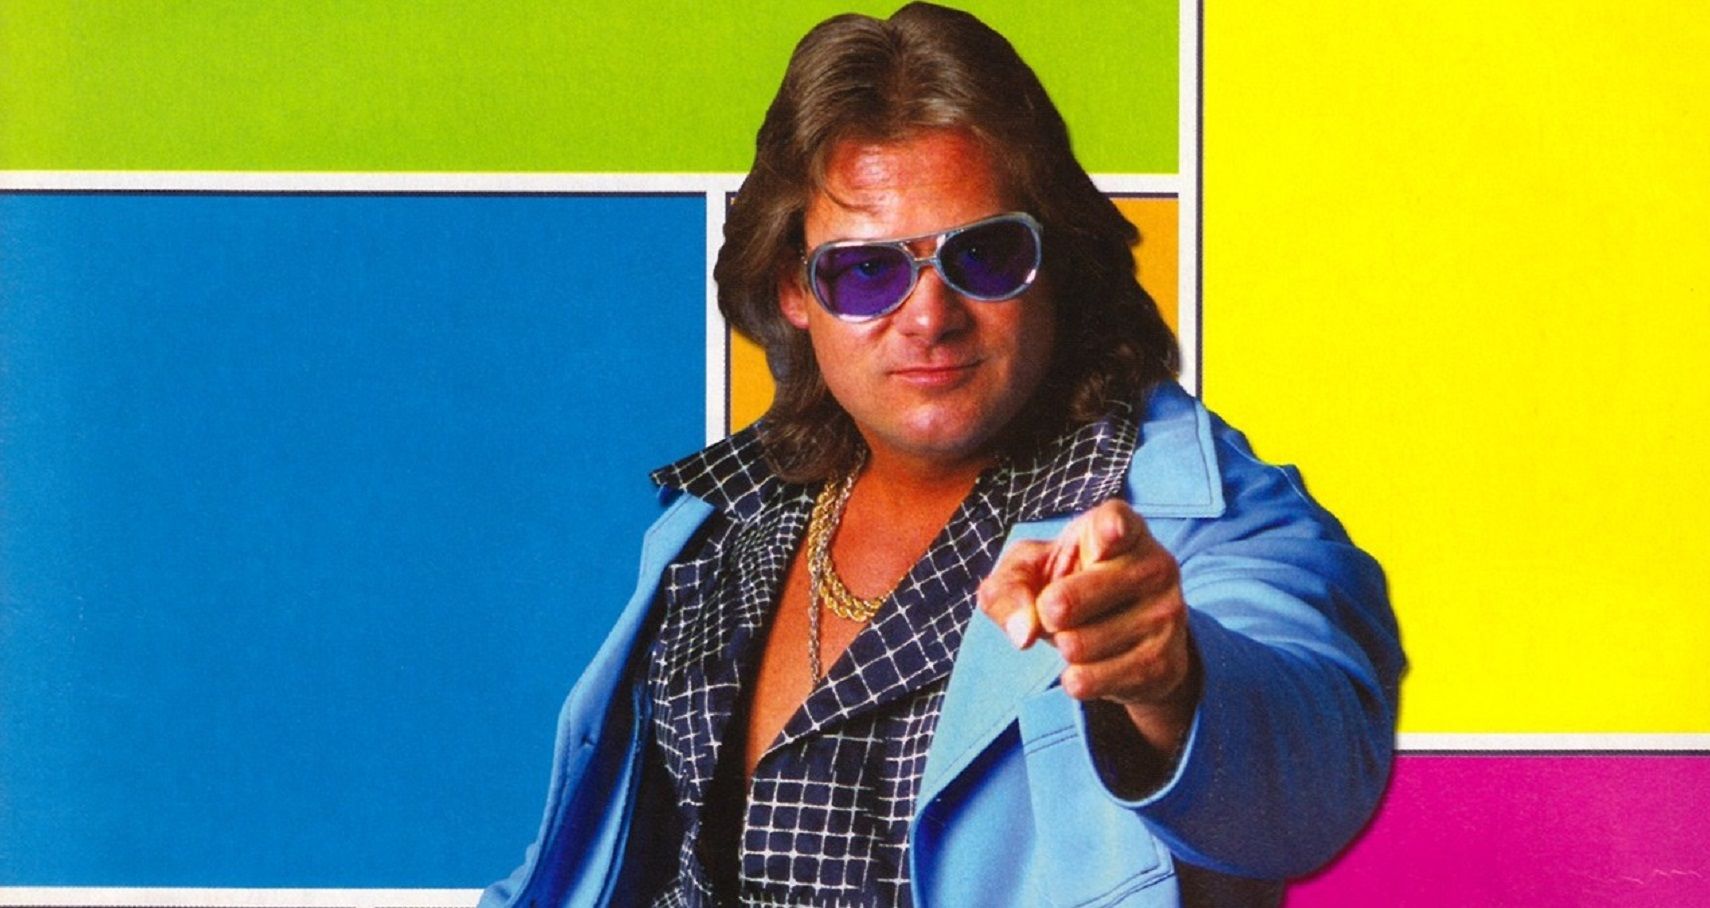 Mike Awesome as That '70s Guy